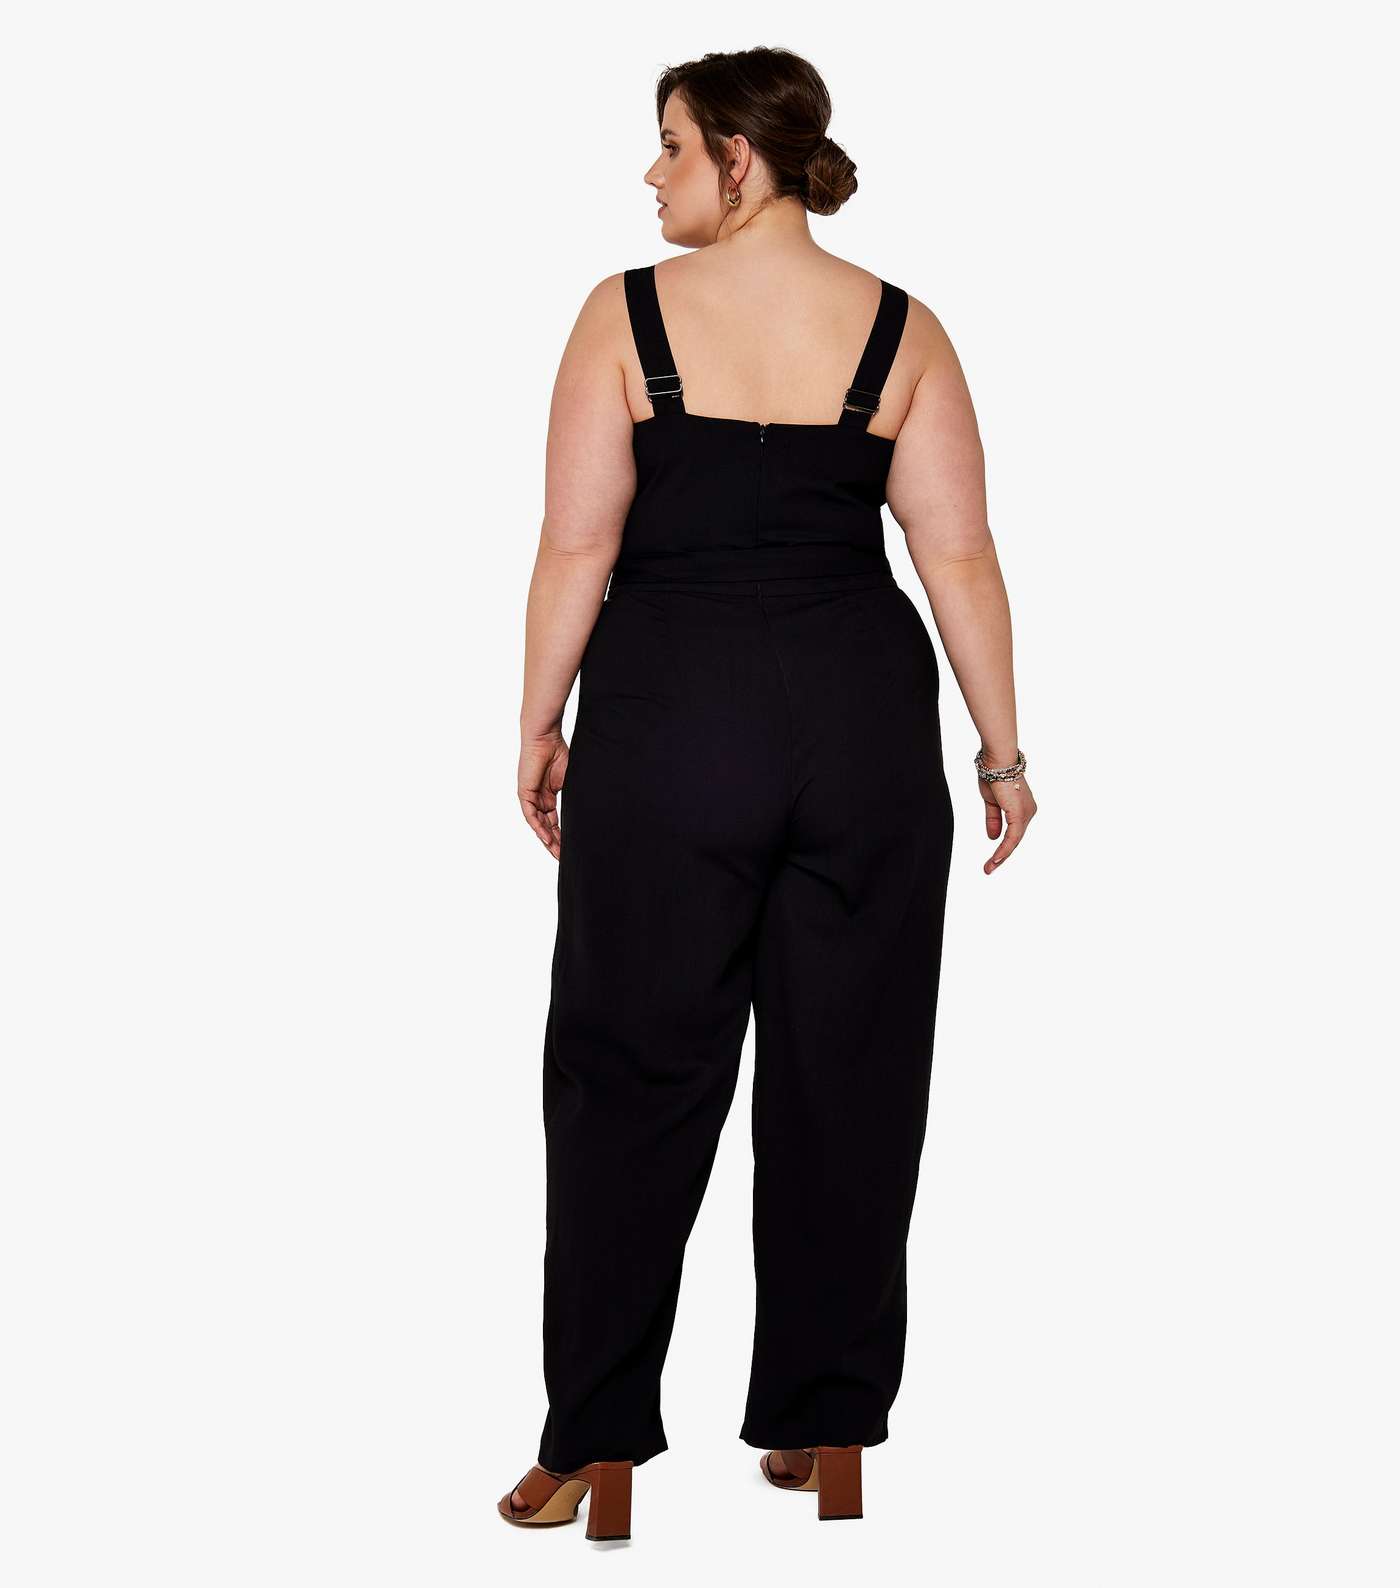 Apricot Curves Black Strappy Dungaree Jumpsuit Image 3